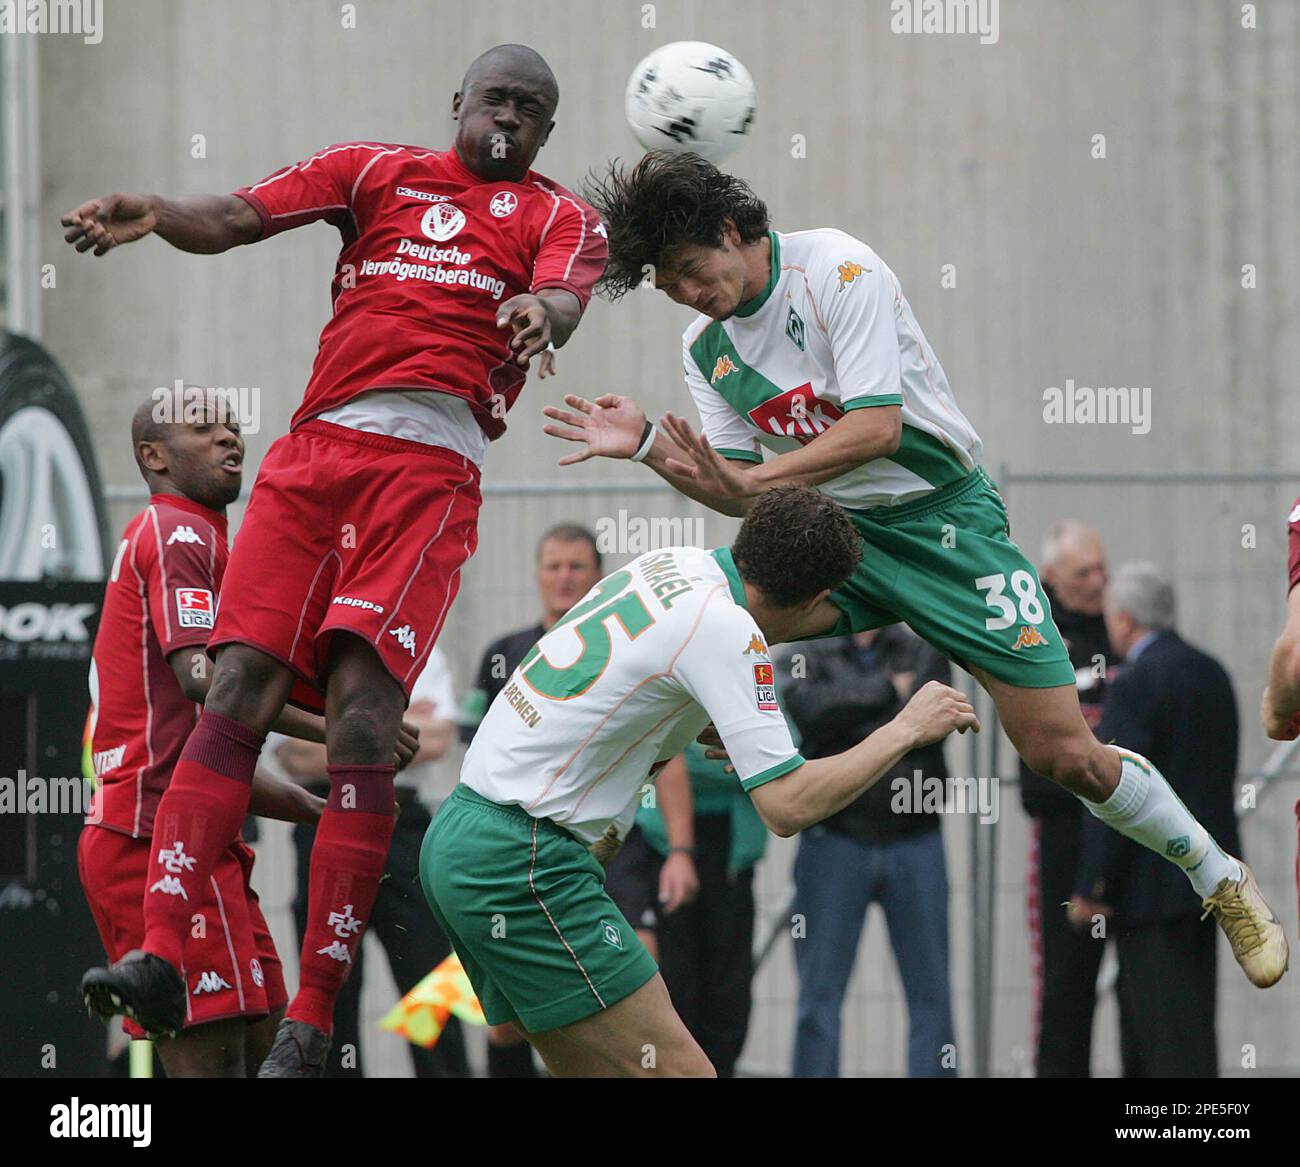 Kaiserslauterns soccer player Lucien Mettomo, left, fights for the ball  against Valerien Ismael,front, and Nelson Antonio Valdez of Werder Bremen  during their first division soccer match, Saturday May 21, 2005, in the